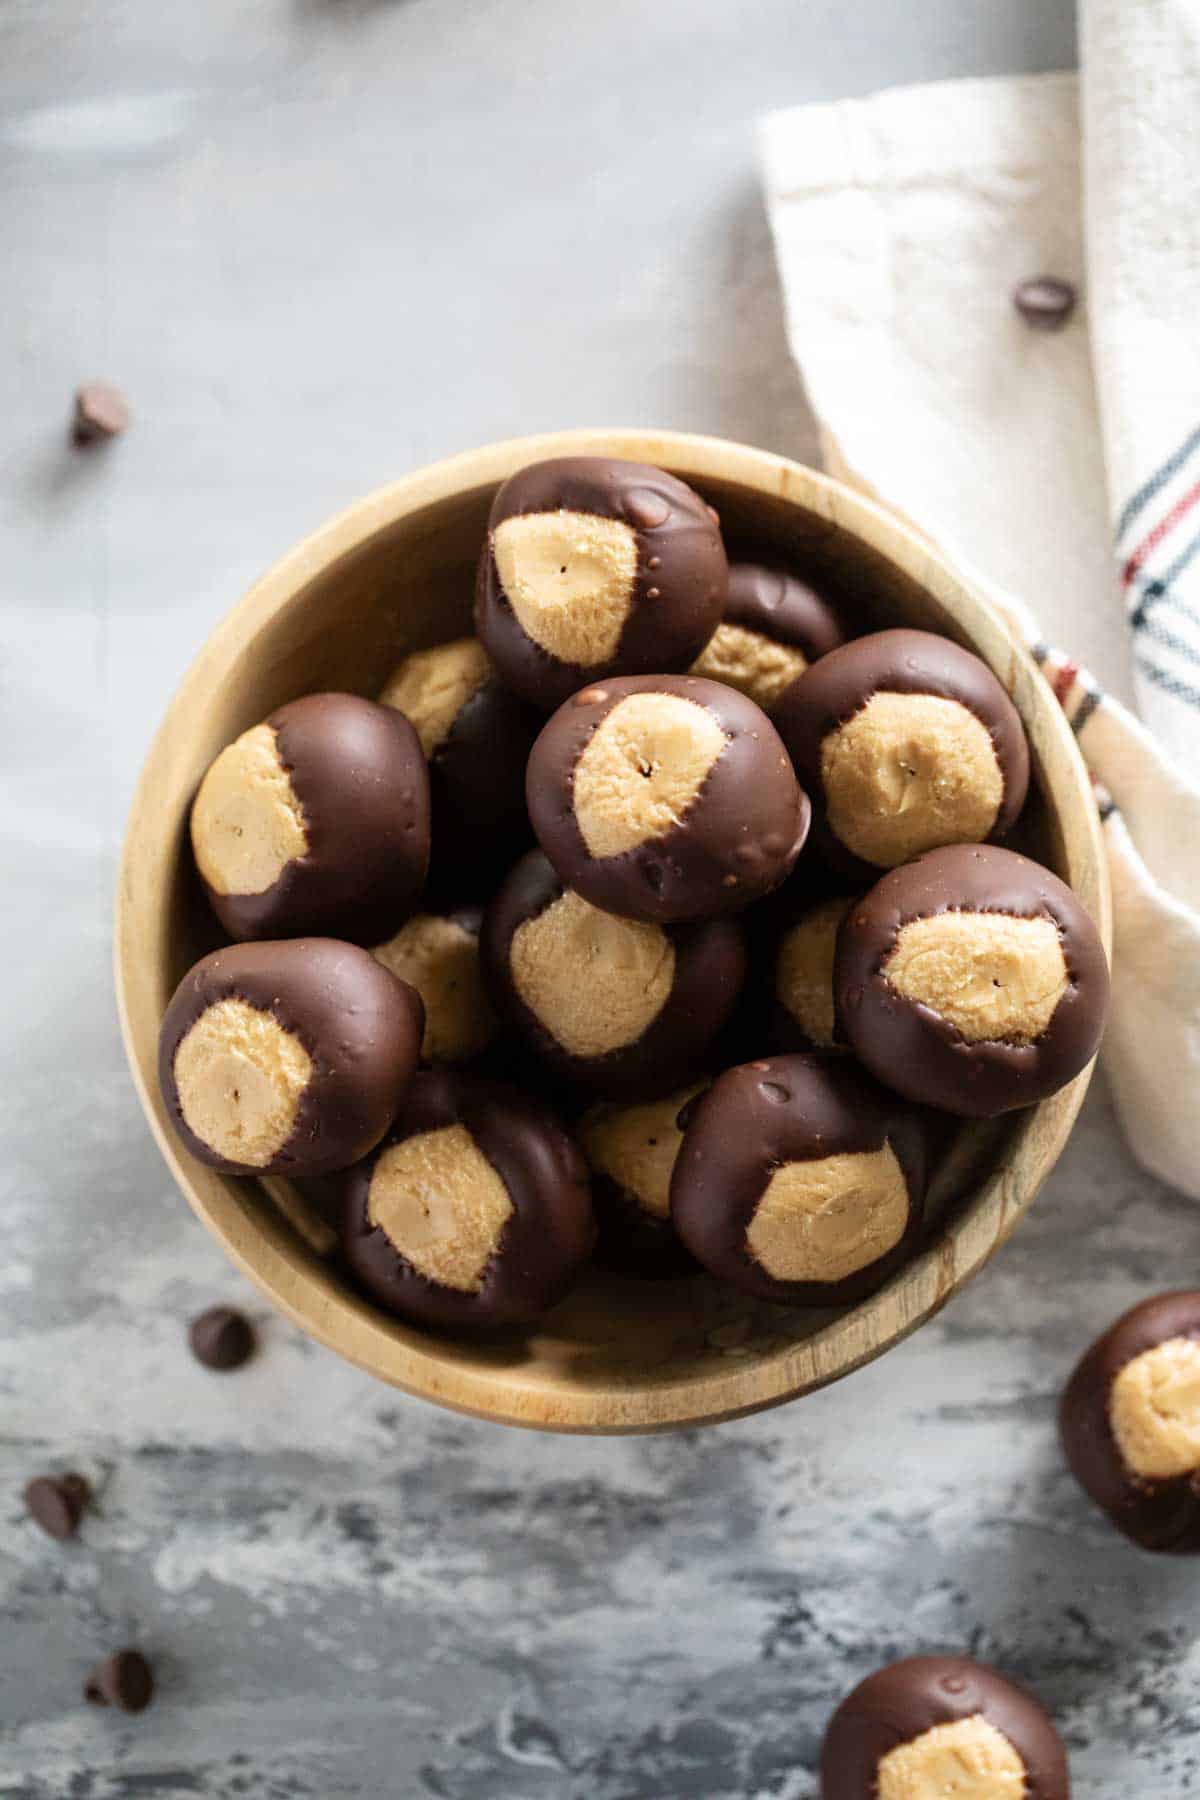 Bowl of buckeyes - chocolate and peanut butter candies.